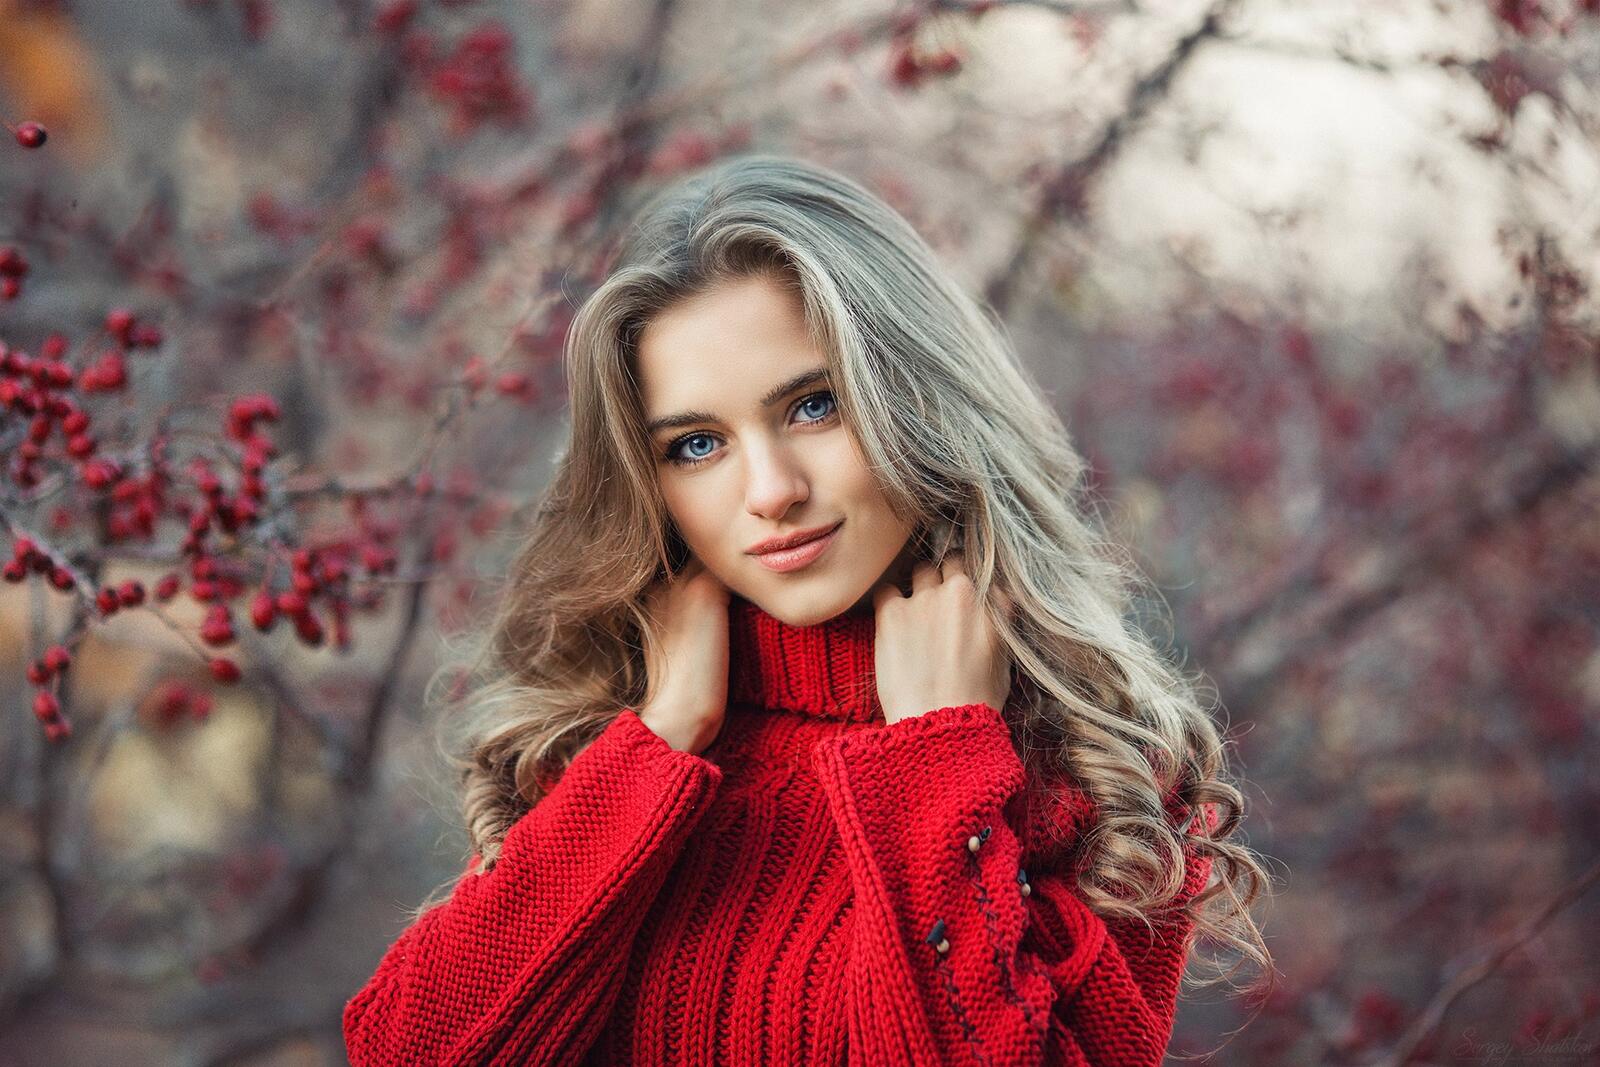 Free photo A girl in a red turtleneck poses against the background of a tree with rowanberries